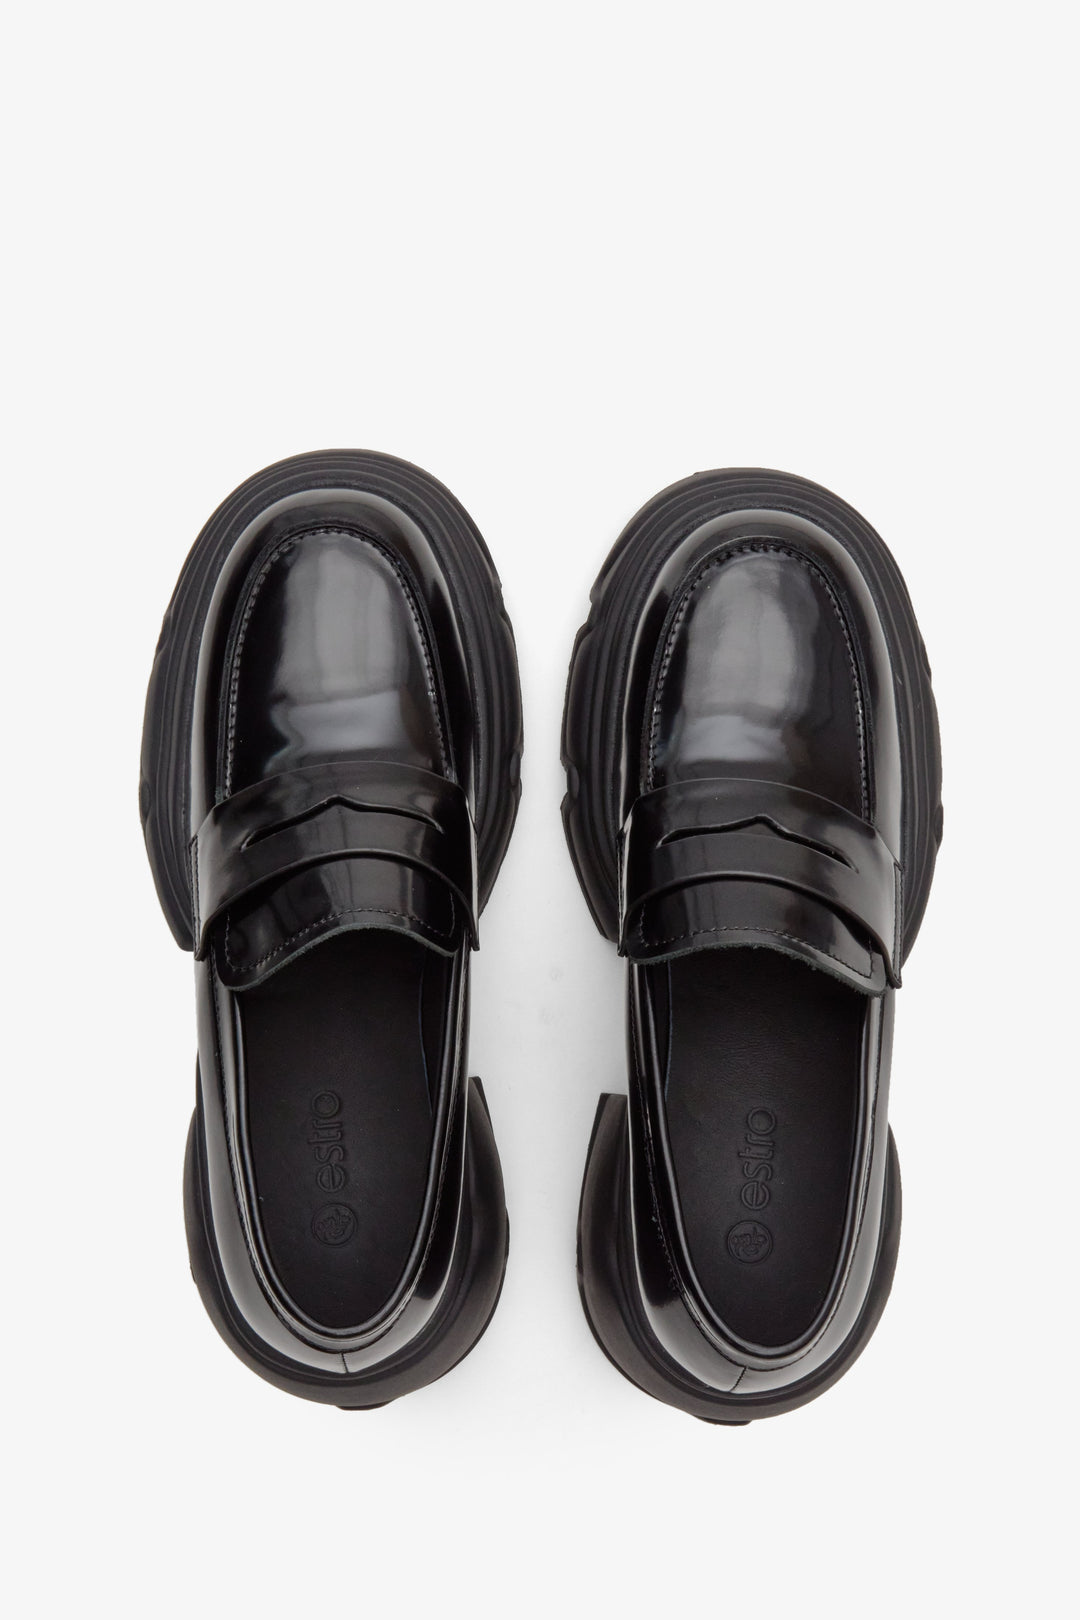 Women's black leather moccasins with a very thick sole by Estro - top view presentation.